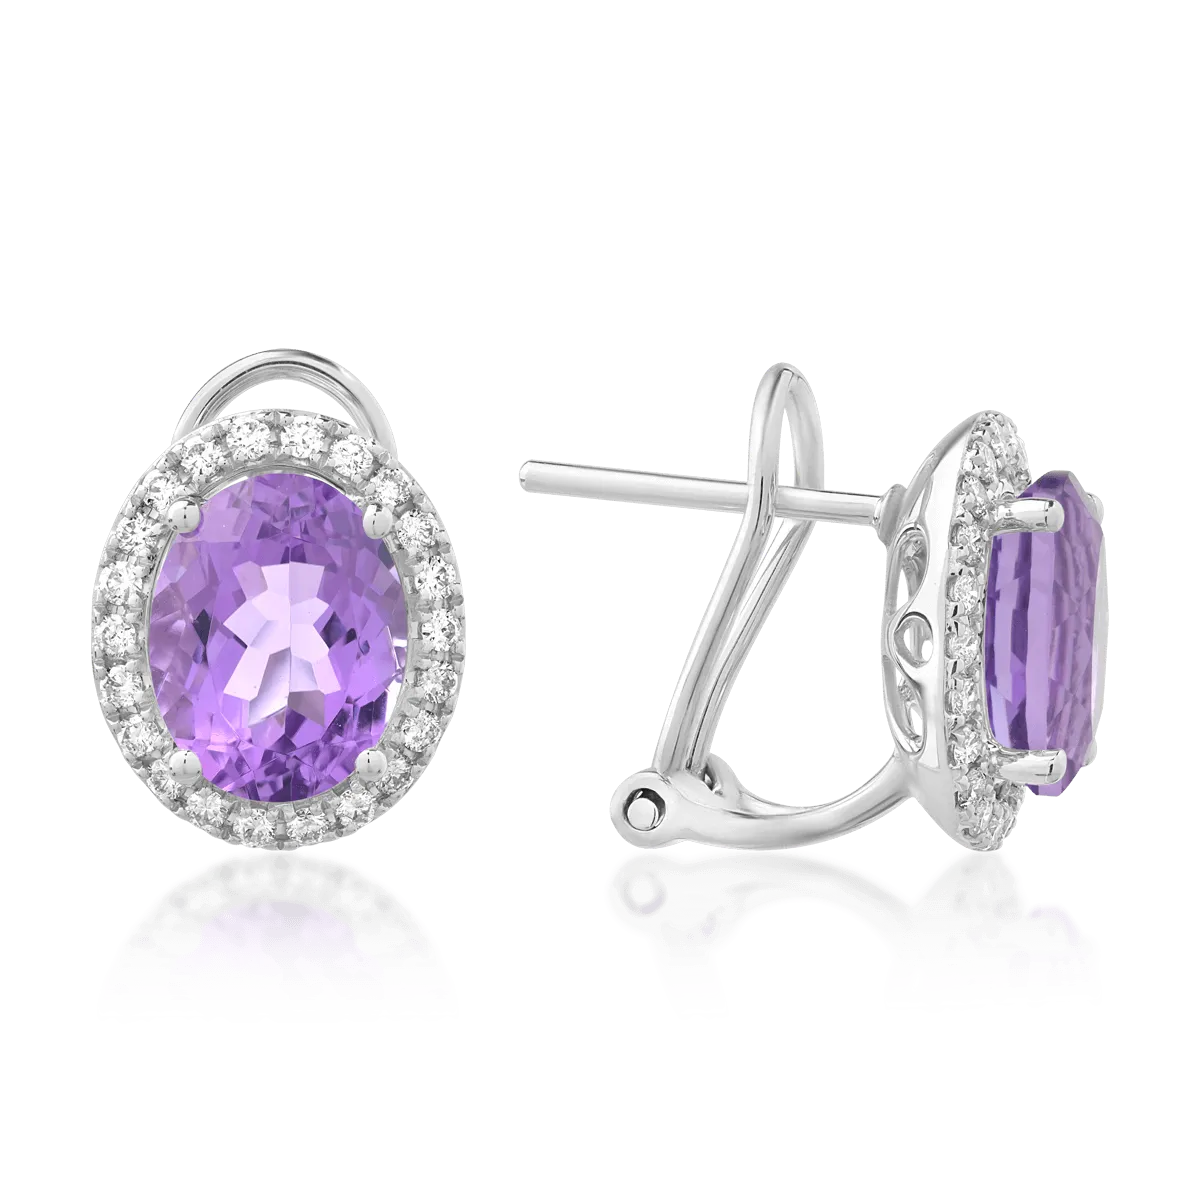 18K white gold earrings with 3.79ct amethysts and 0.305ct diamonds